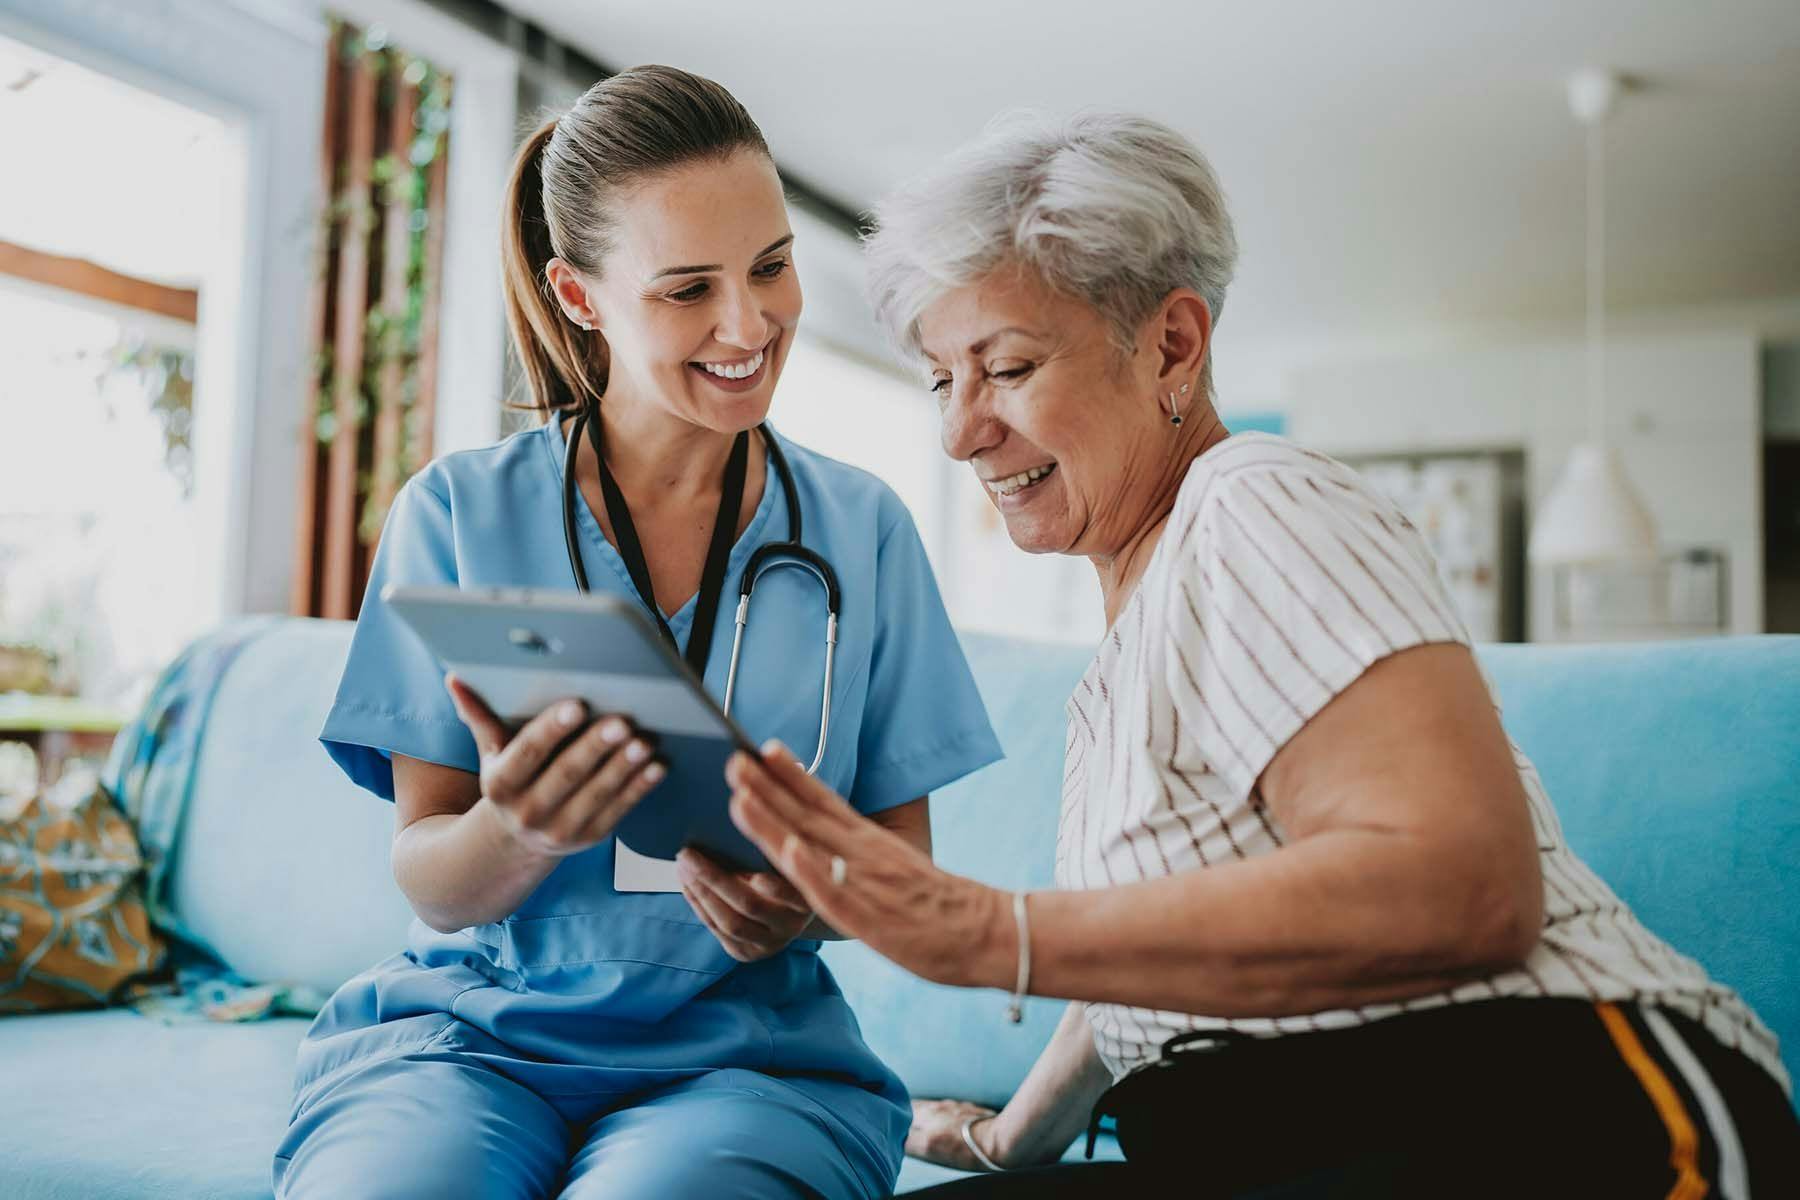 University of Iowa College of Dentistry and Dental Clinics Research Reveals Breakthrough in Dementia Care with Innovative Mobile App | Image Credit: © Delta Dental Institute